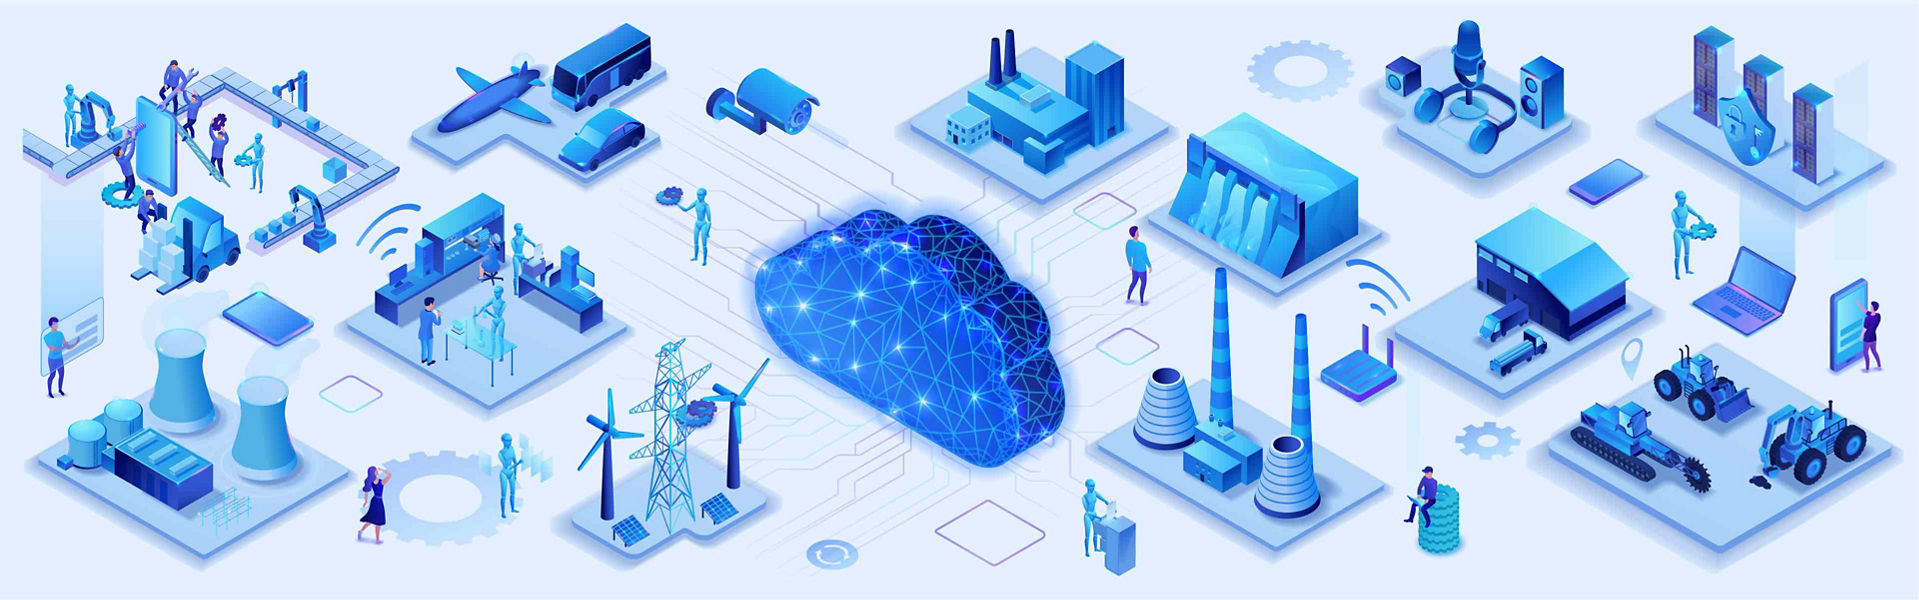 Illustration in dark and light blue colours showing how cloud technology connects different industries including power, agriculture, education and entertainment 